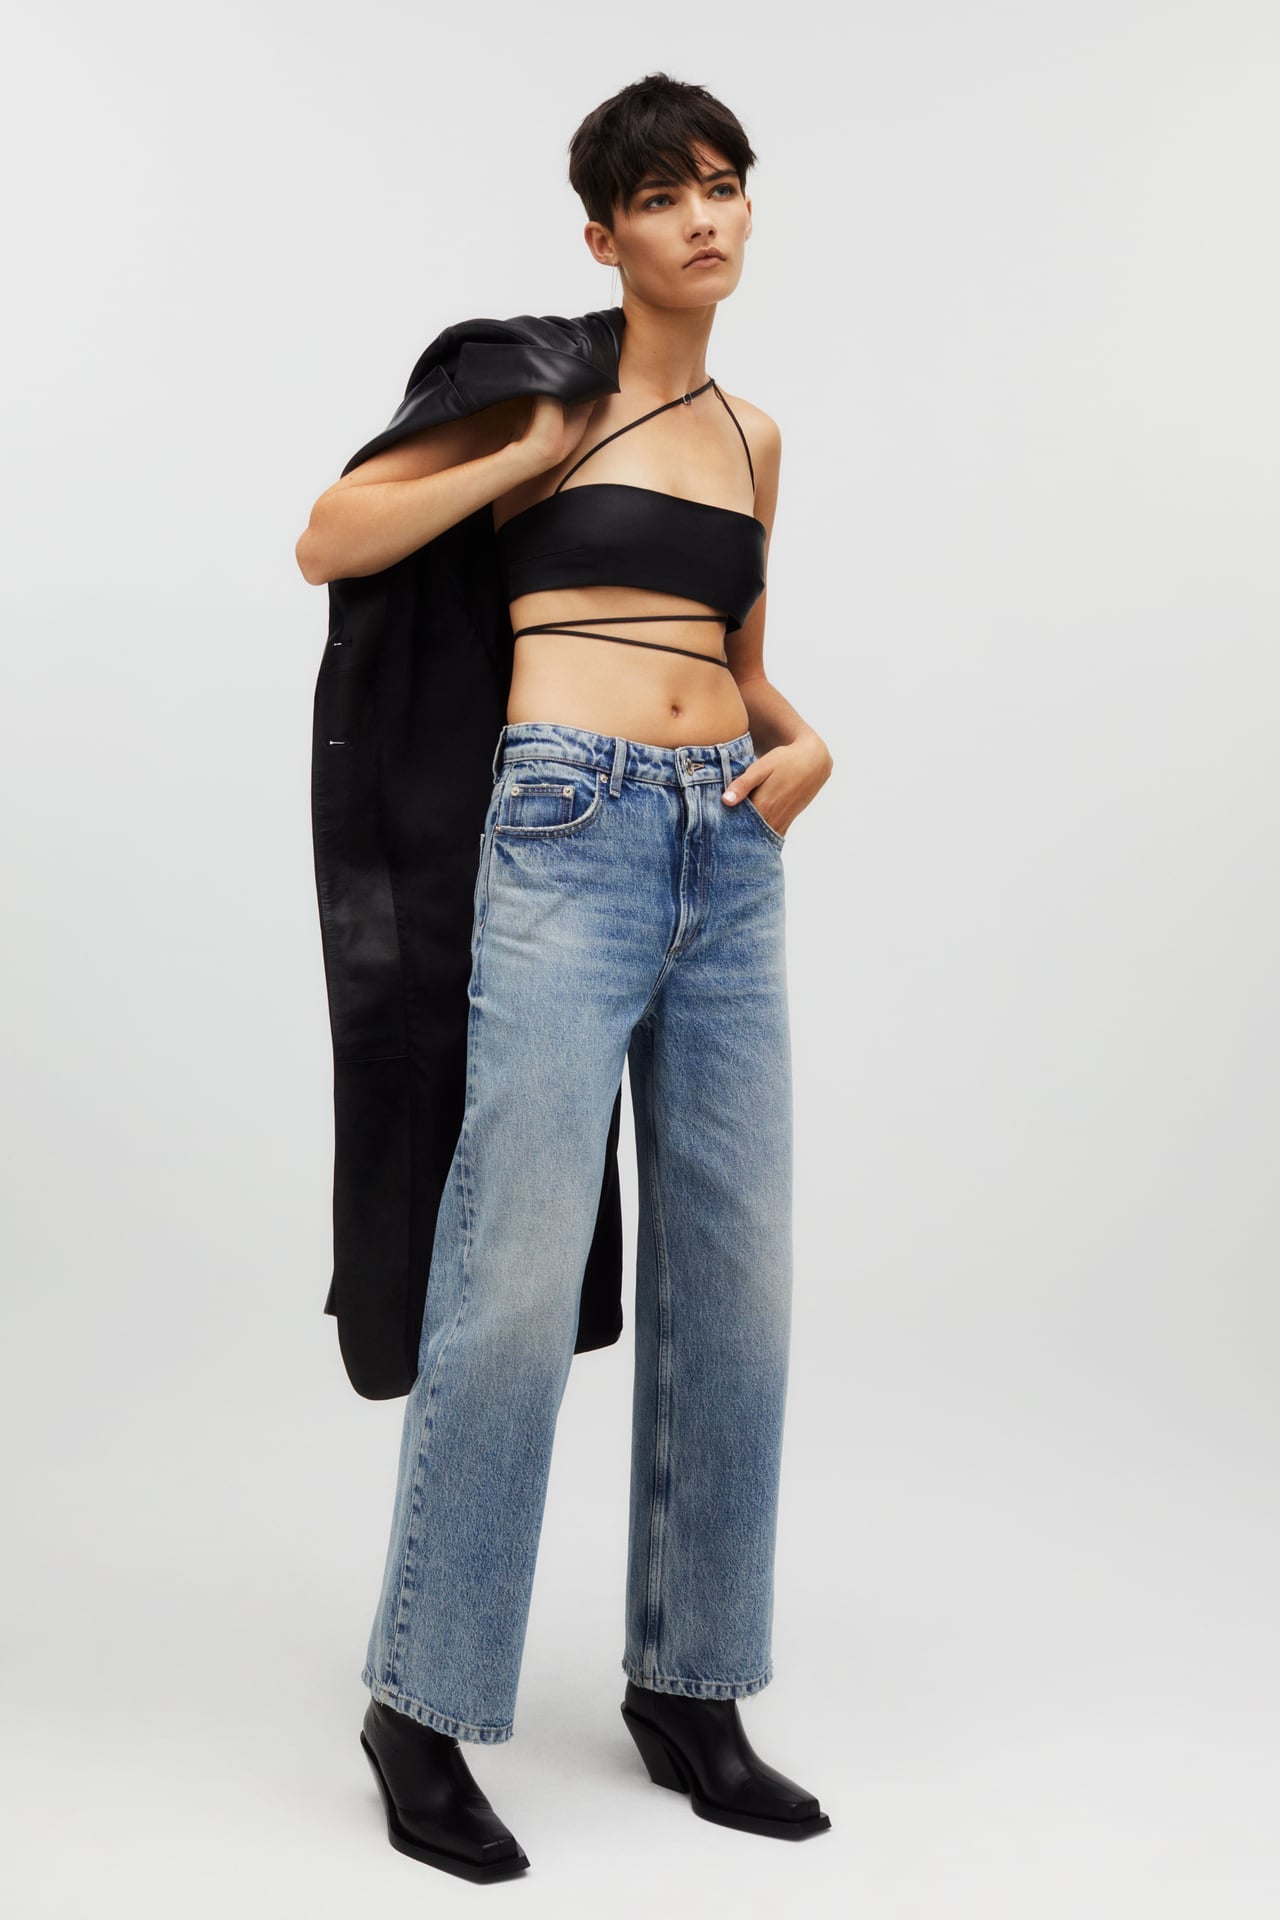 Kaia x Zara Baggy Jeans and Leather Crop Top, Kaia Gerber Has a New  Capsule Collection With Zara